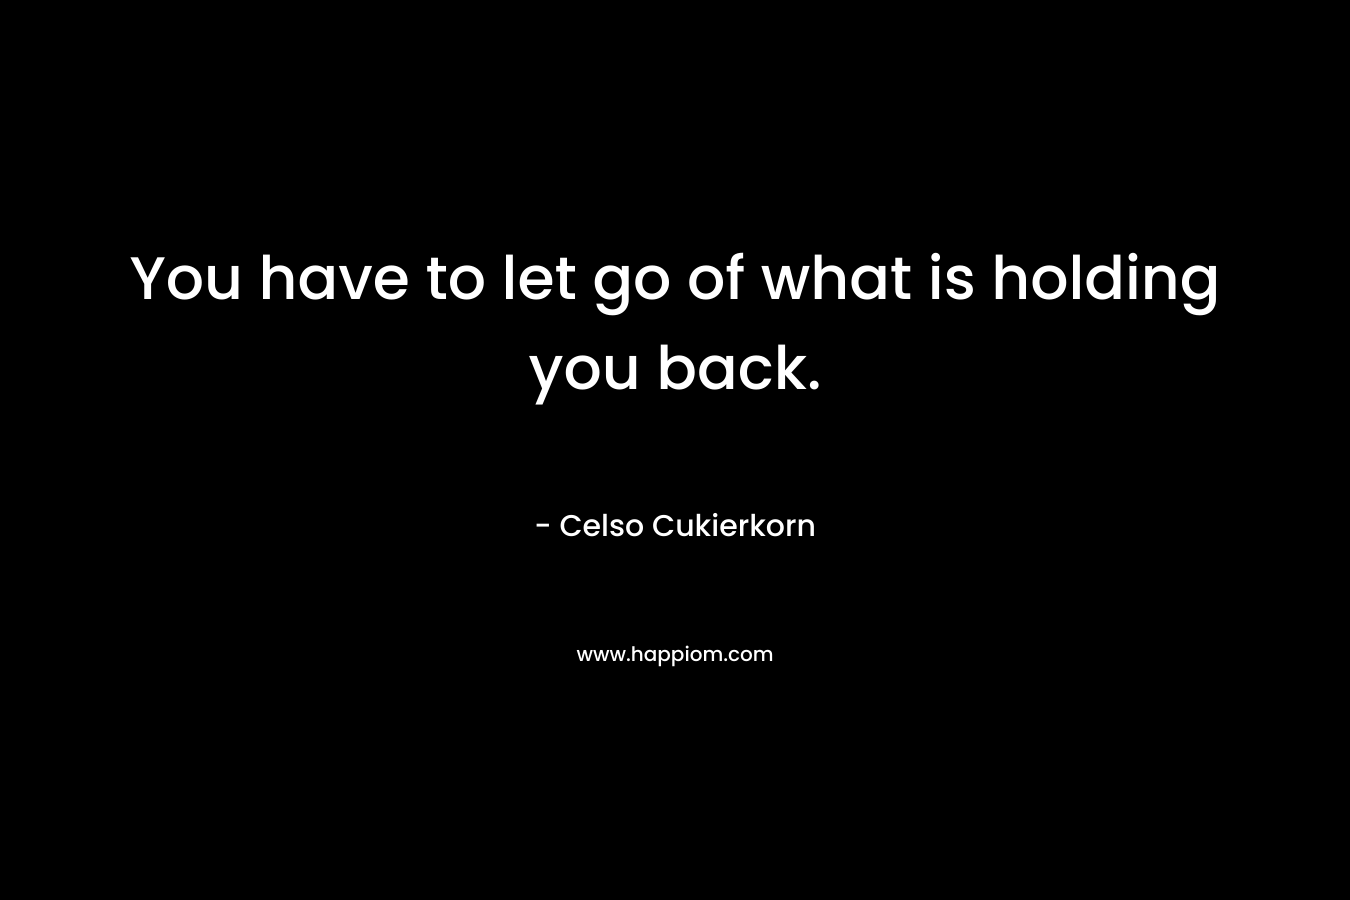 You have to let go of what is holding you back.